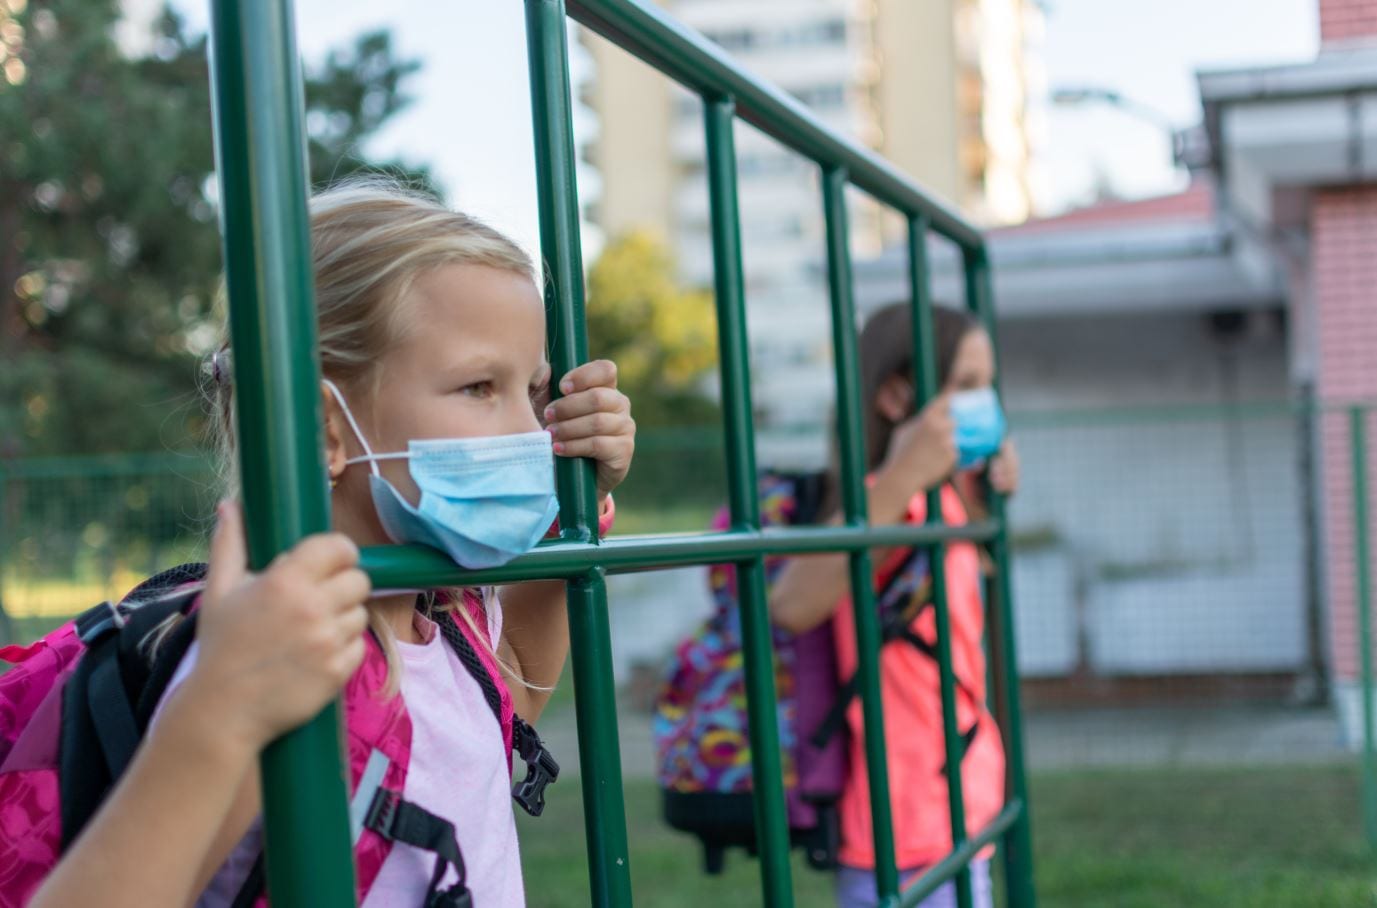 Children at school gates with mask on